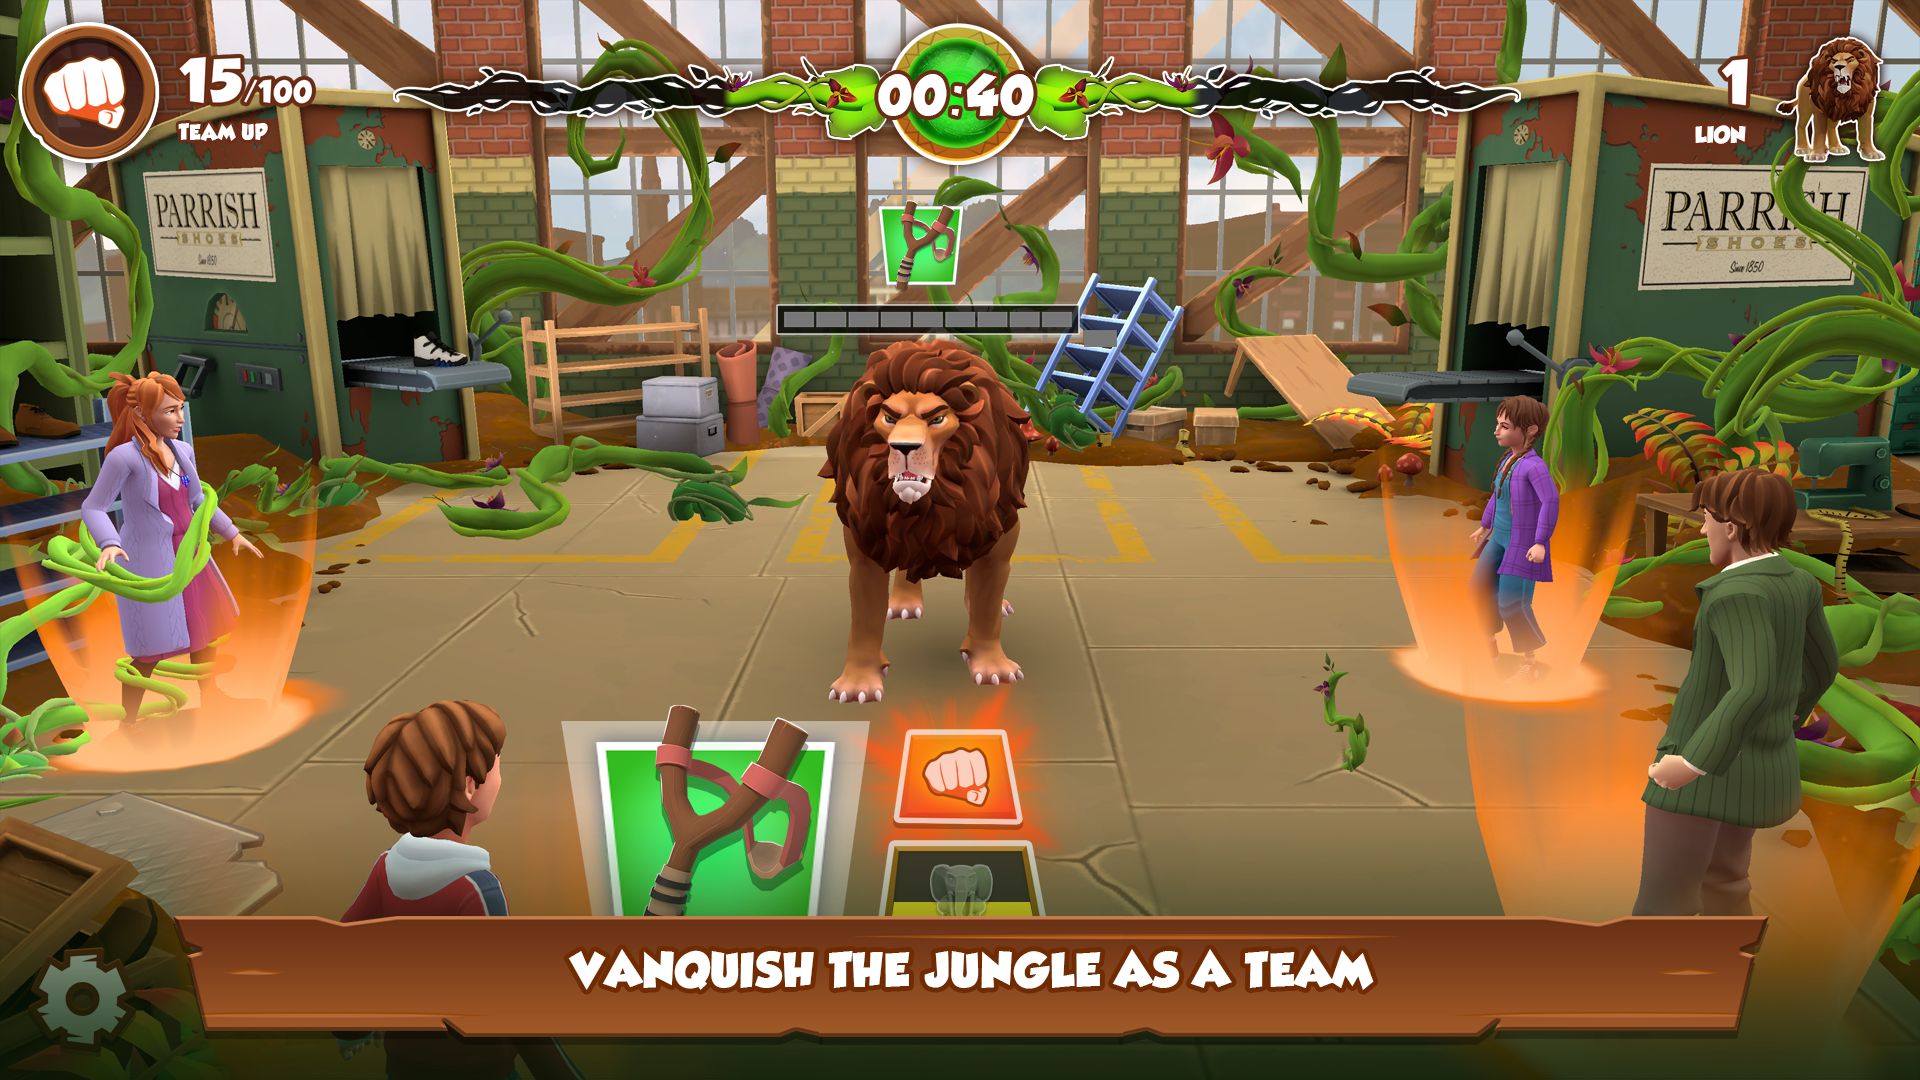 JUMANJI: The Curse Returns for Android